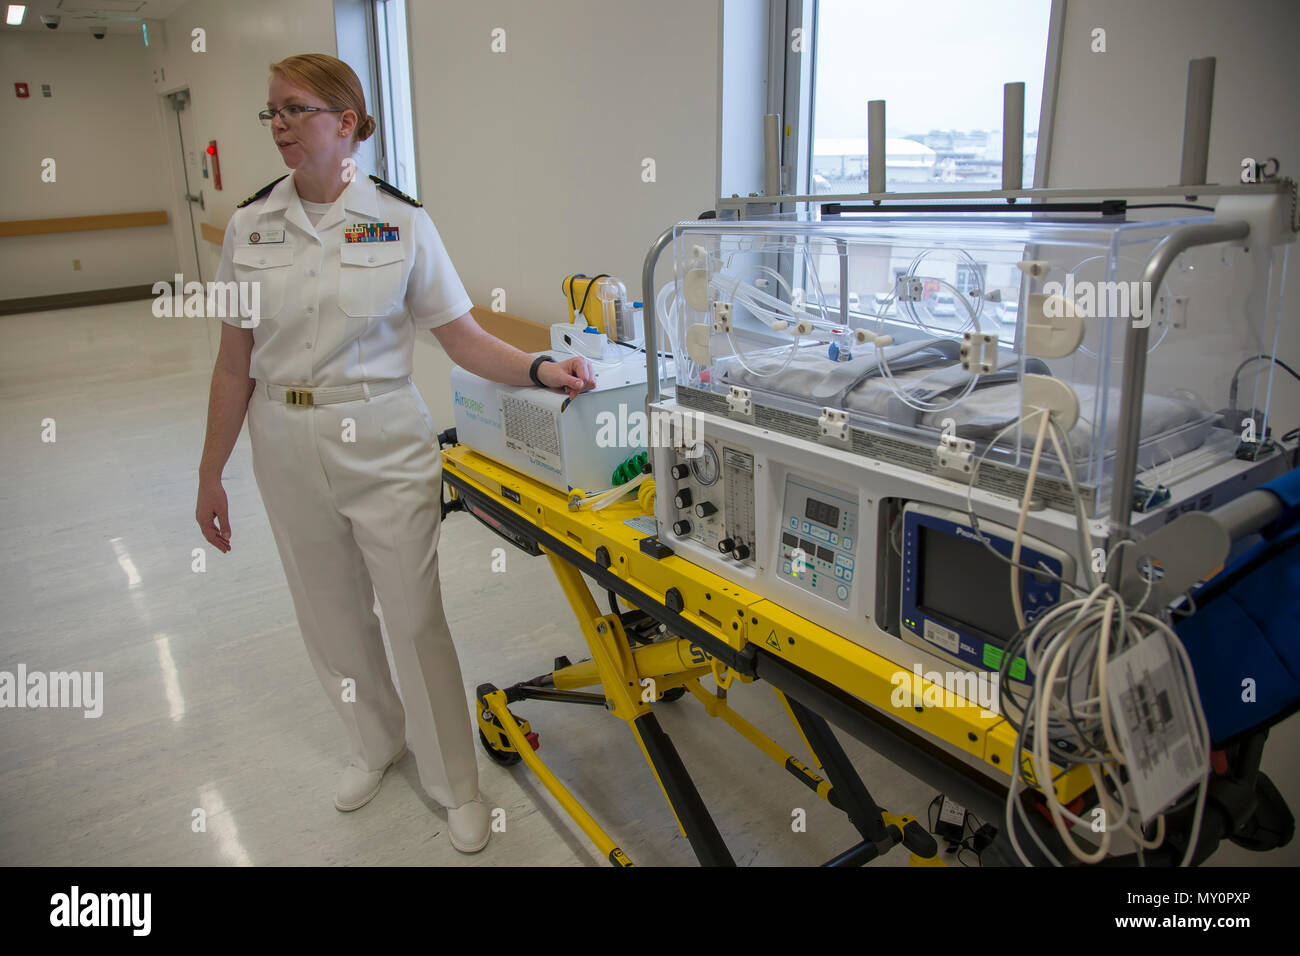 U.S. Navy Lt. Cmdr. Eileen Scott, department head of the Mother Infant Care Center at Robert M. Casey Naval Family Branch Clinic Iwakuni, demonstrates the capabilities of a neonatal transporter at Marine Corps Air Station Iwakuni, Japan, May 30, 2018. The demonstration was part of the grand opening of the Robert M. Casey Naval Family Branch Clinic Iwakuni. The staff hosted the grand opening in order to display the facility’s new and improved capabilities. (U.S. Marine Corps photo by Lance Cpl. Seth Rosenberg) Stock Photo